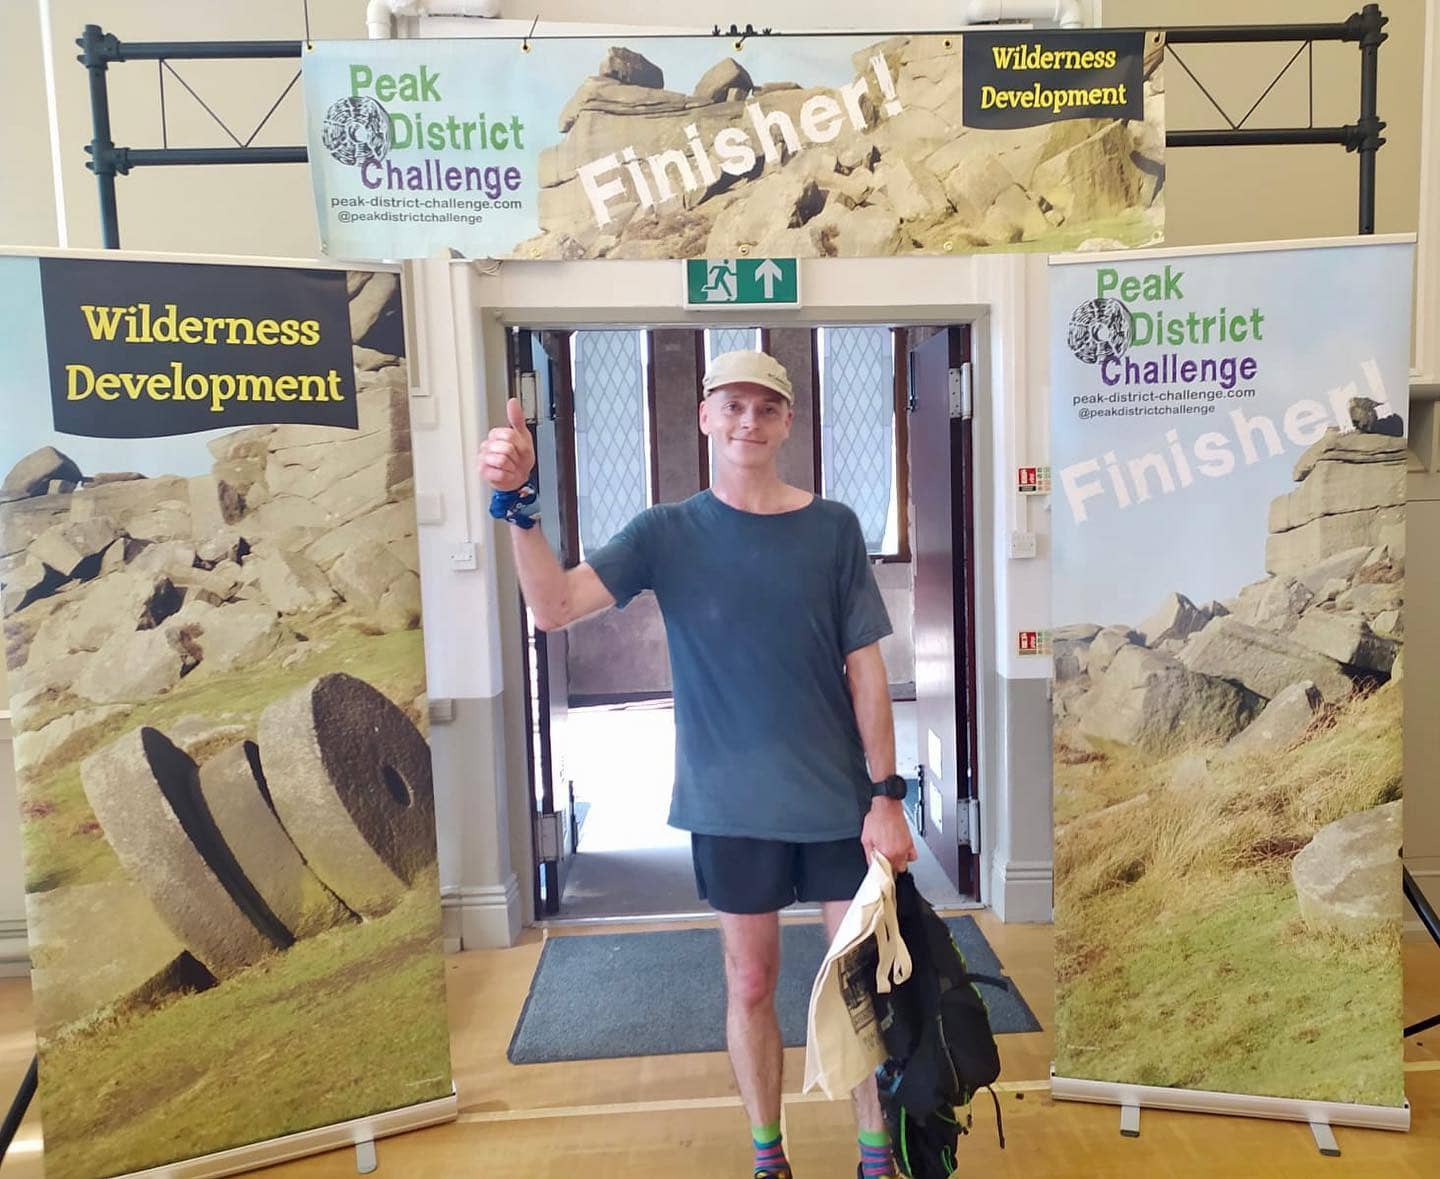 Congratulations to Will Carver who regained his 2019 title on the Peak District Challenge Bronze ...